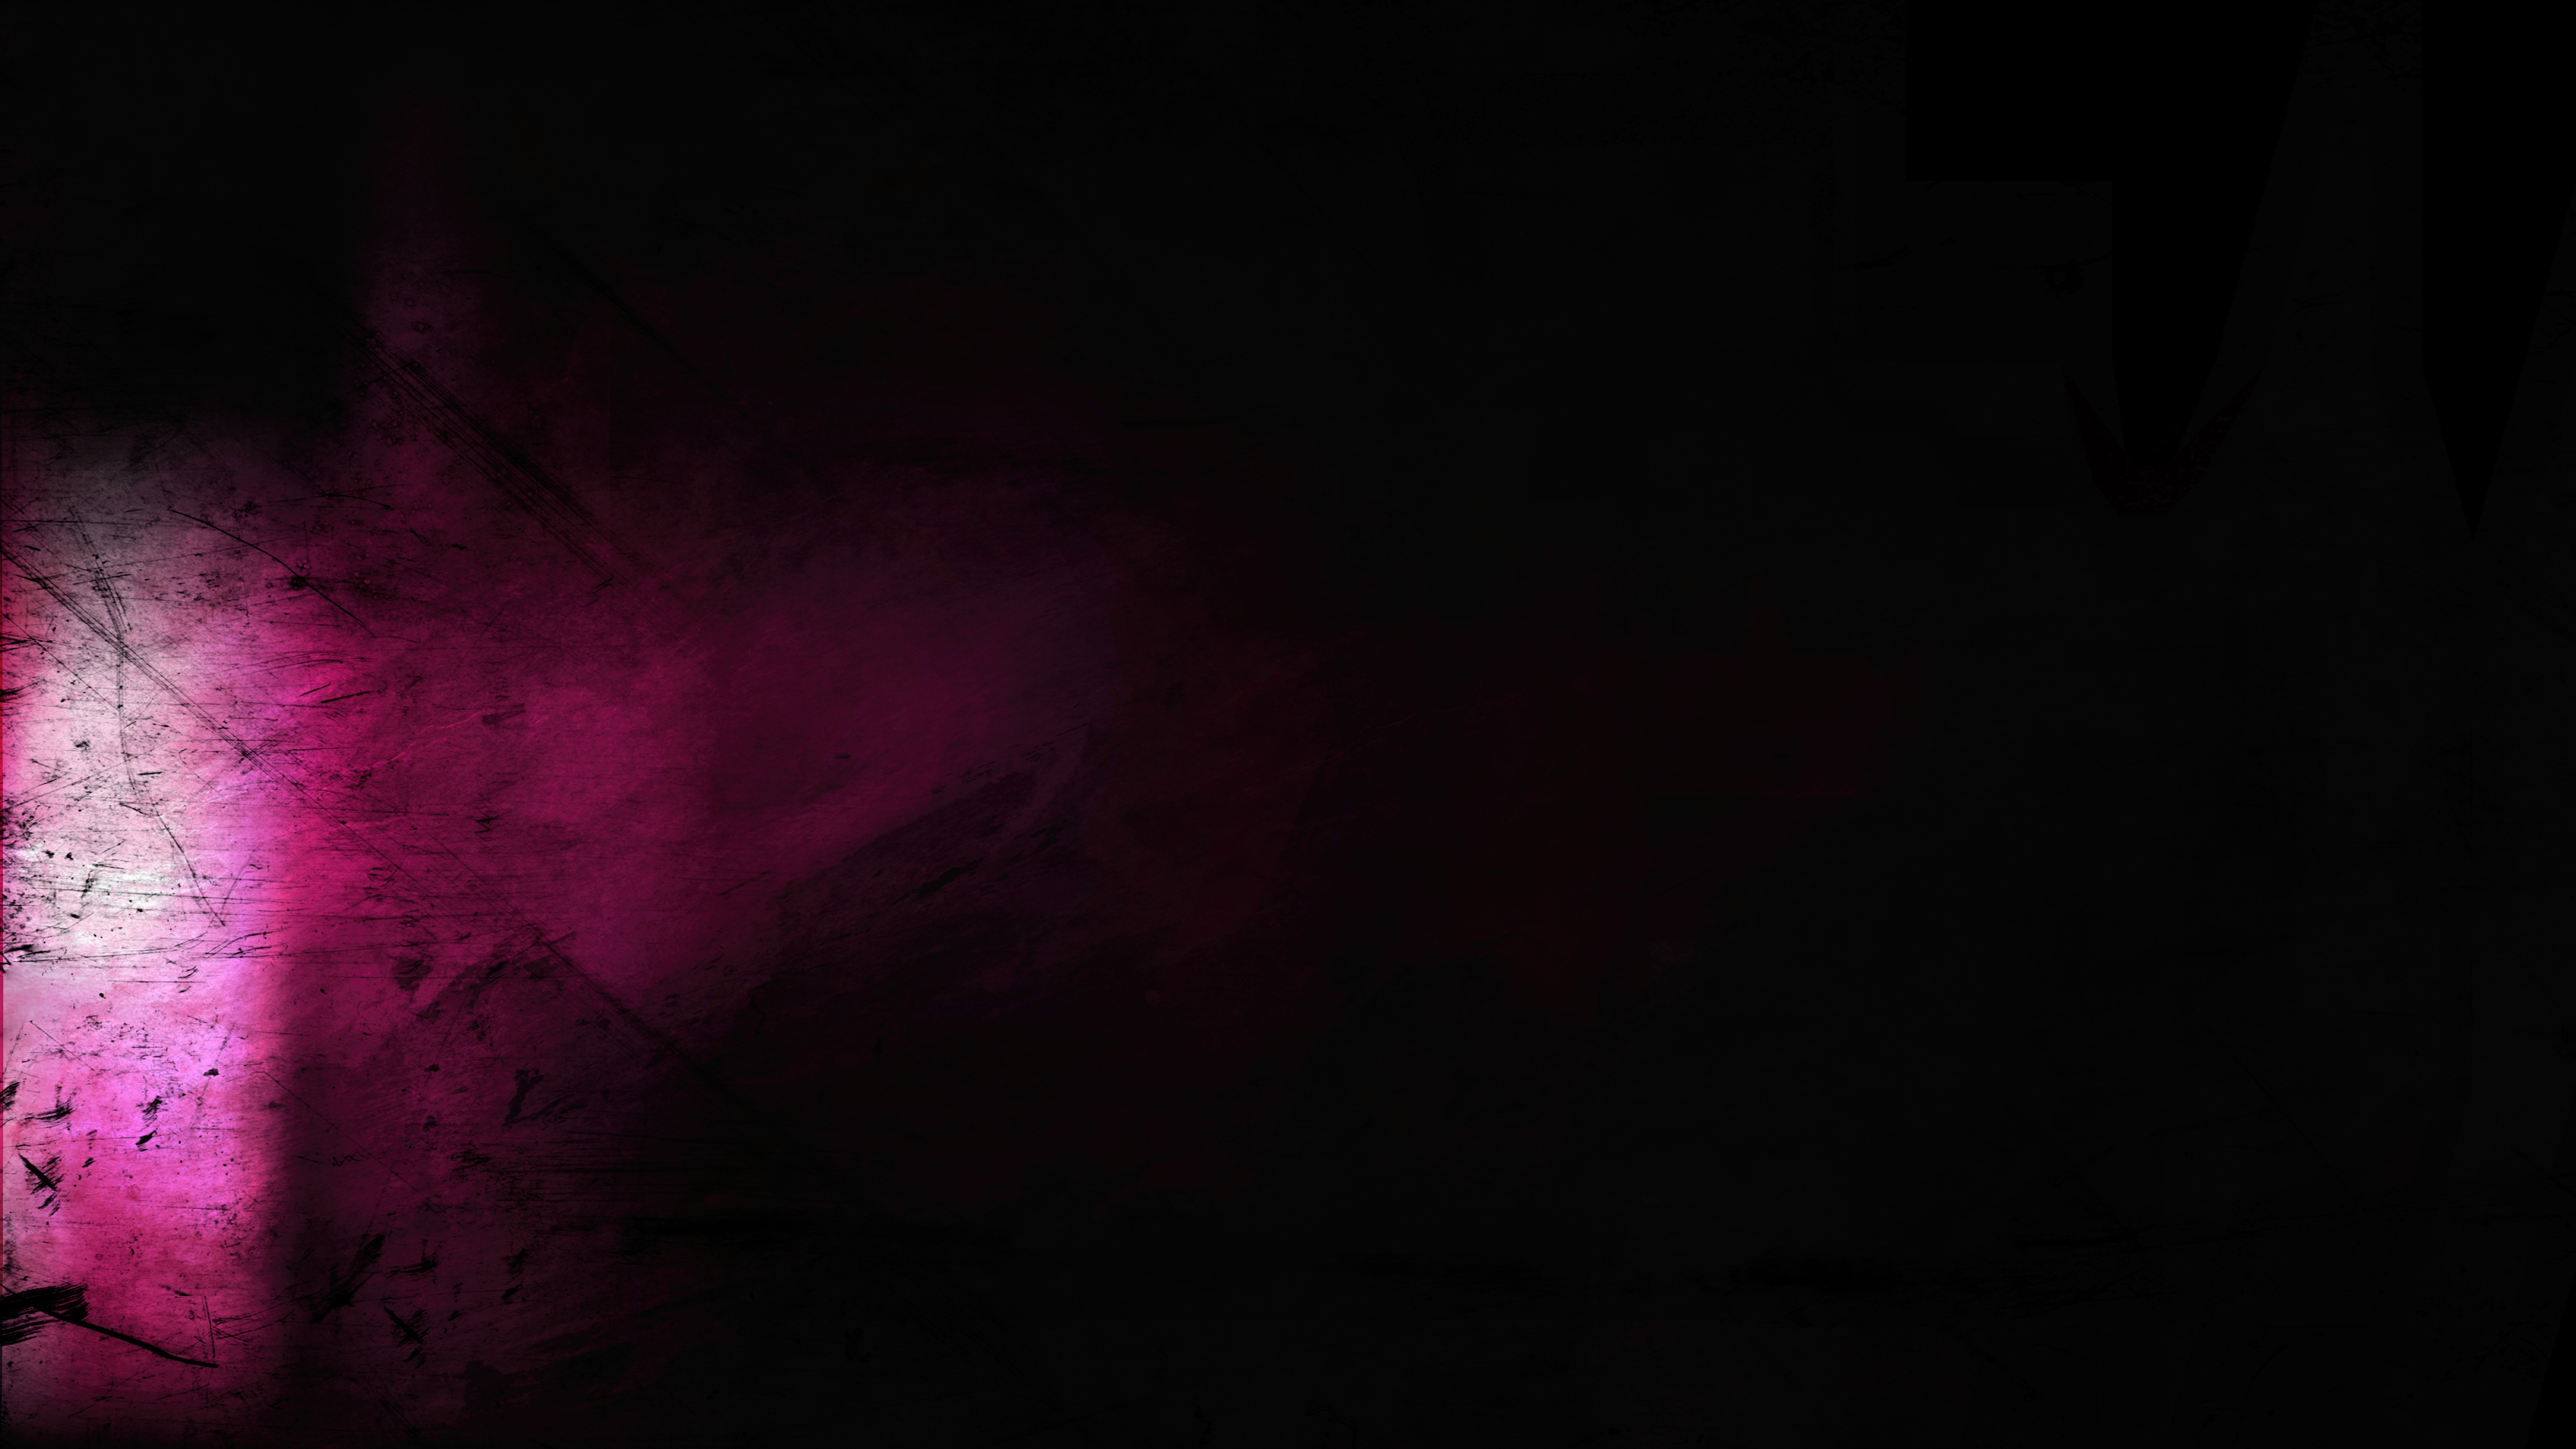 Free Pink and Black Grunge Texture Background Image